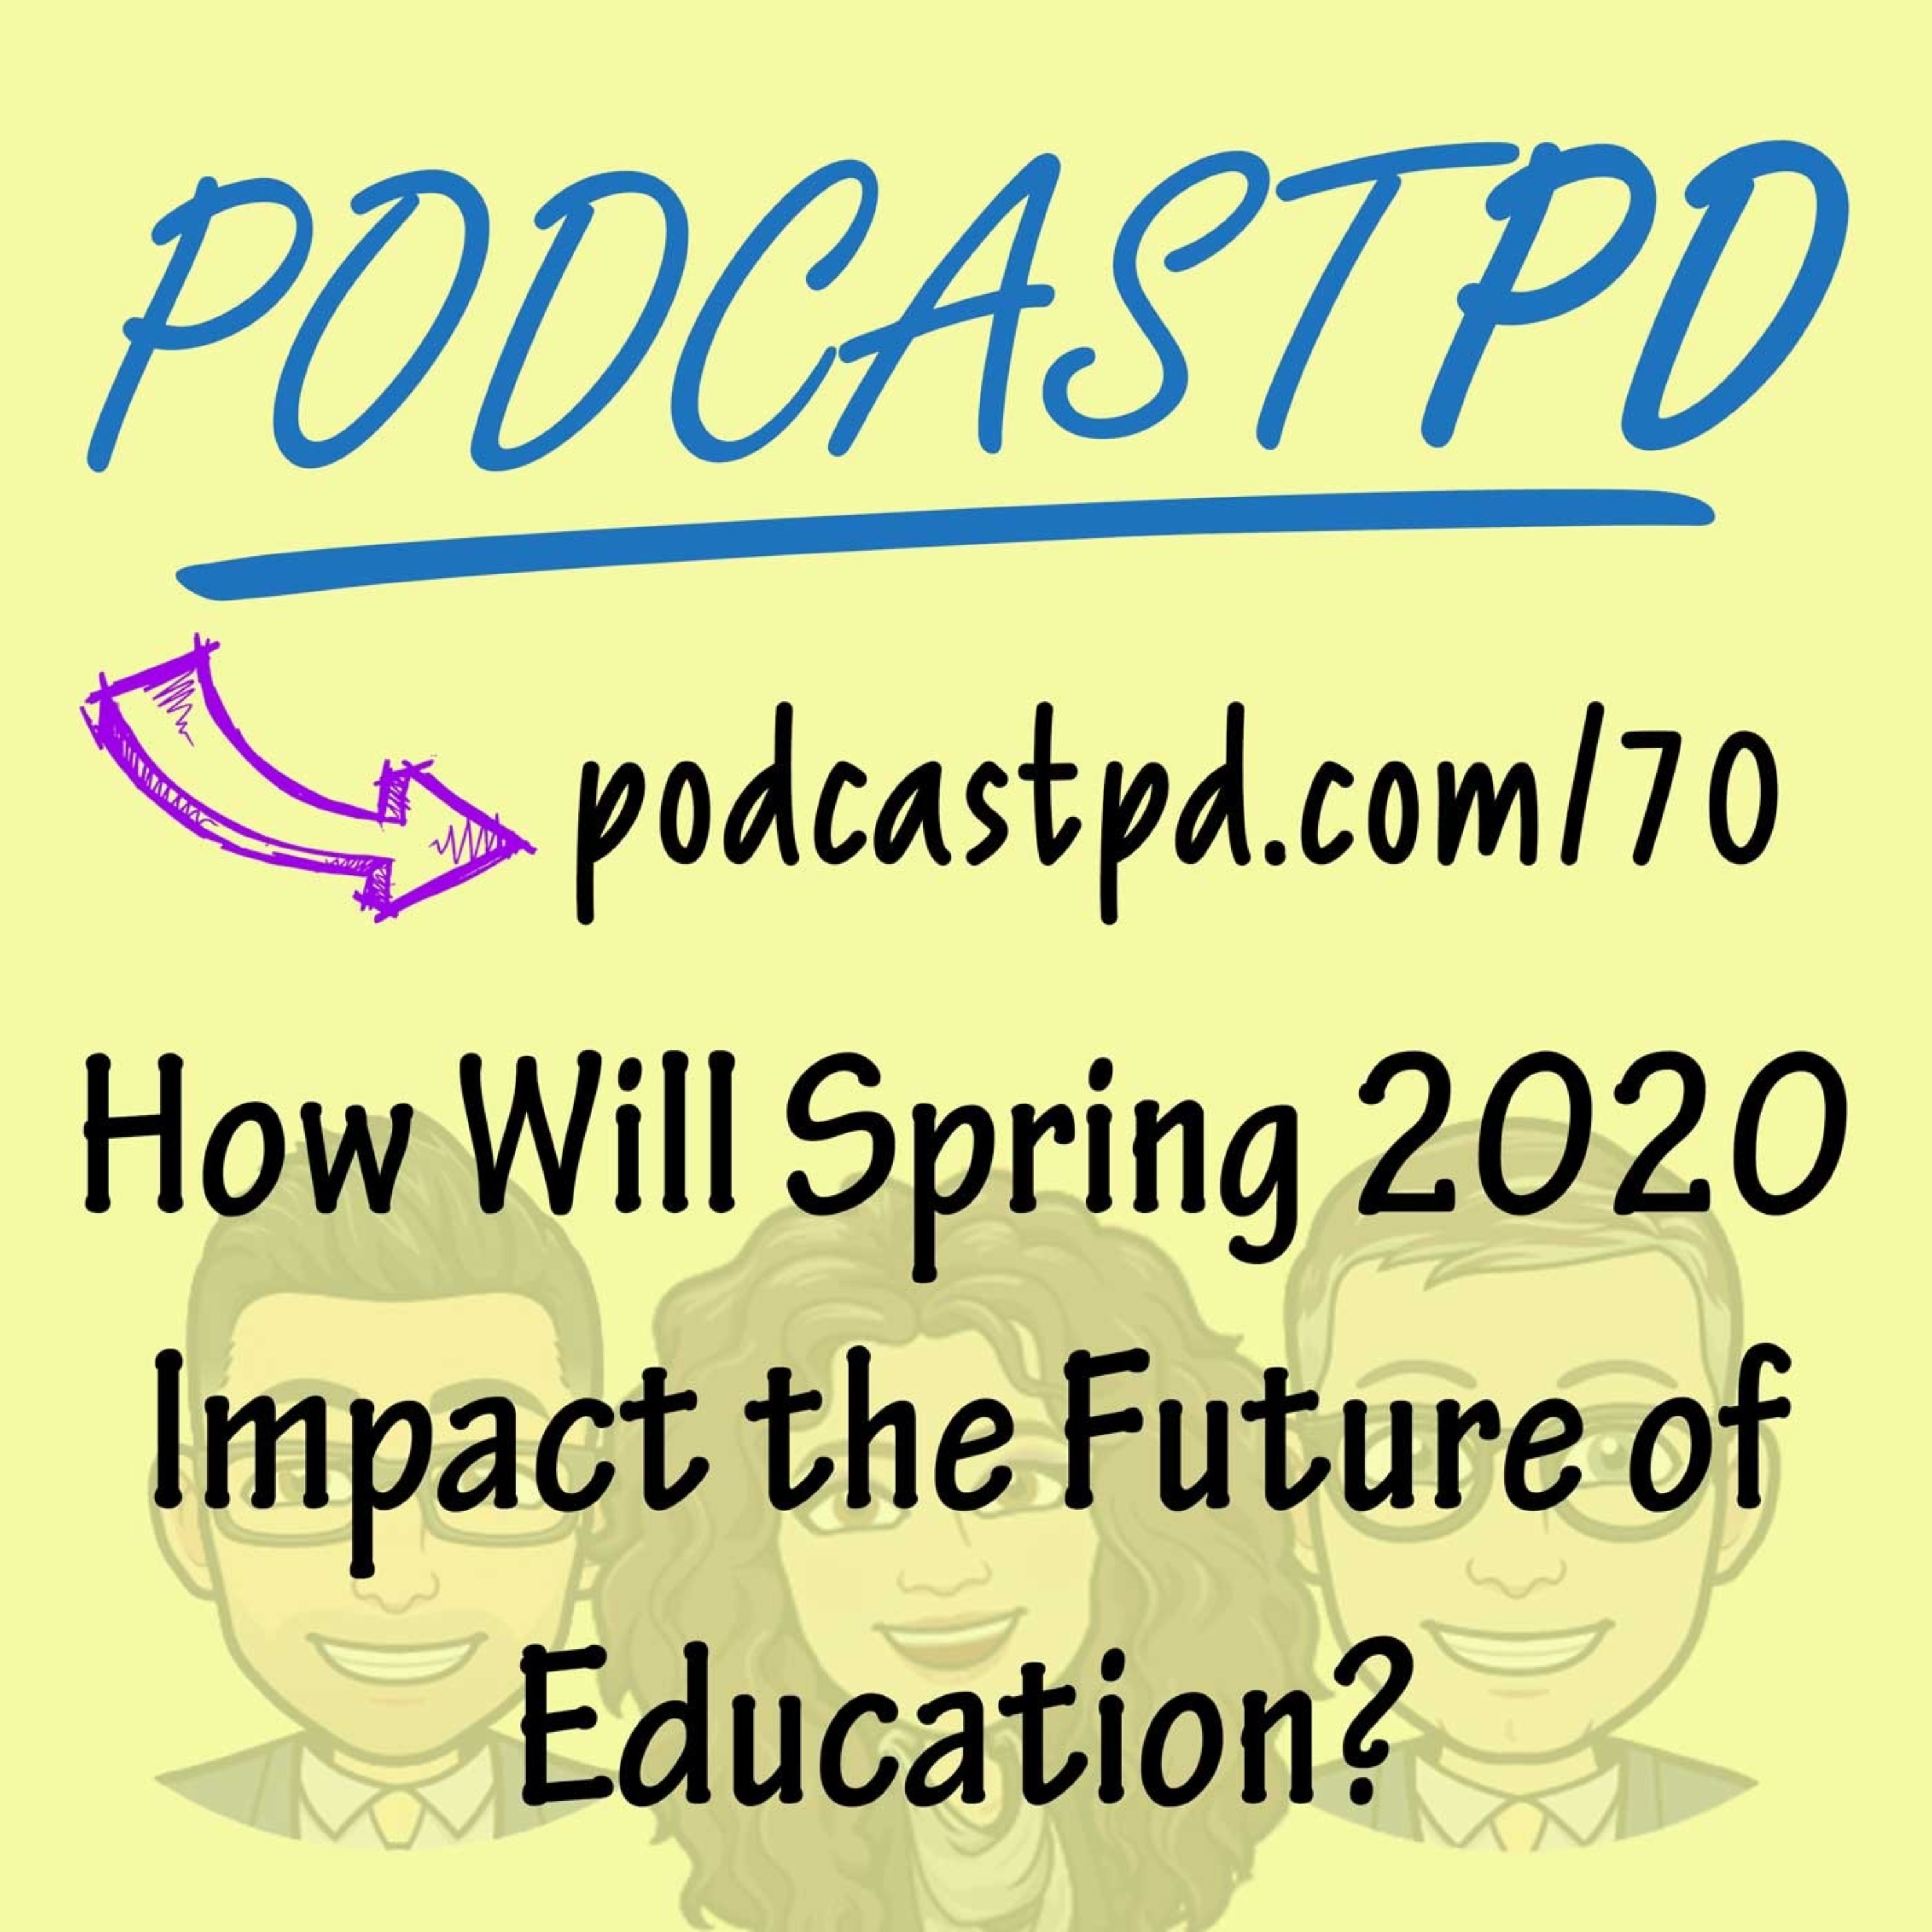 How Will Spring 2020 Impact the Future of Education? - PPD070 Image